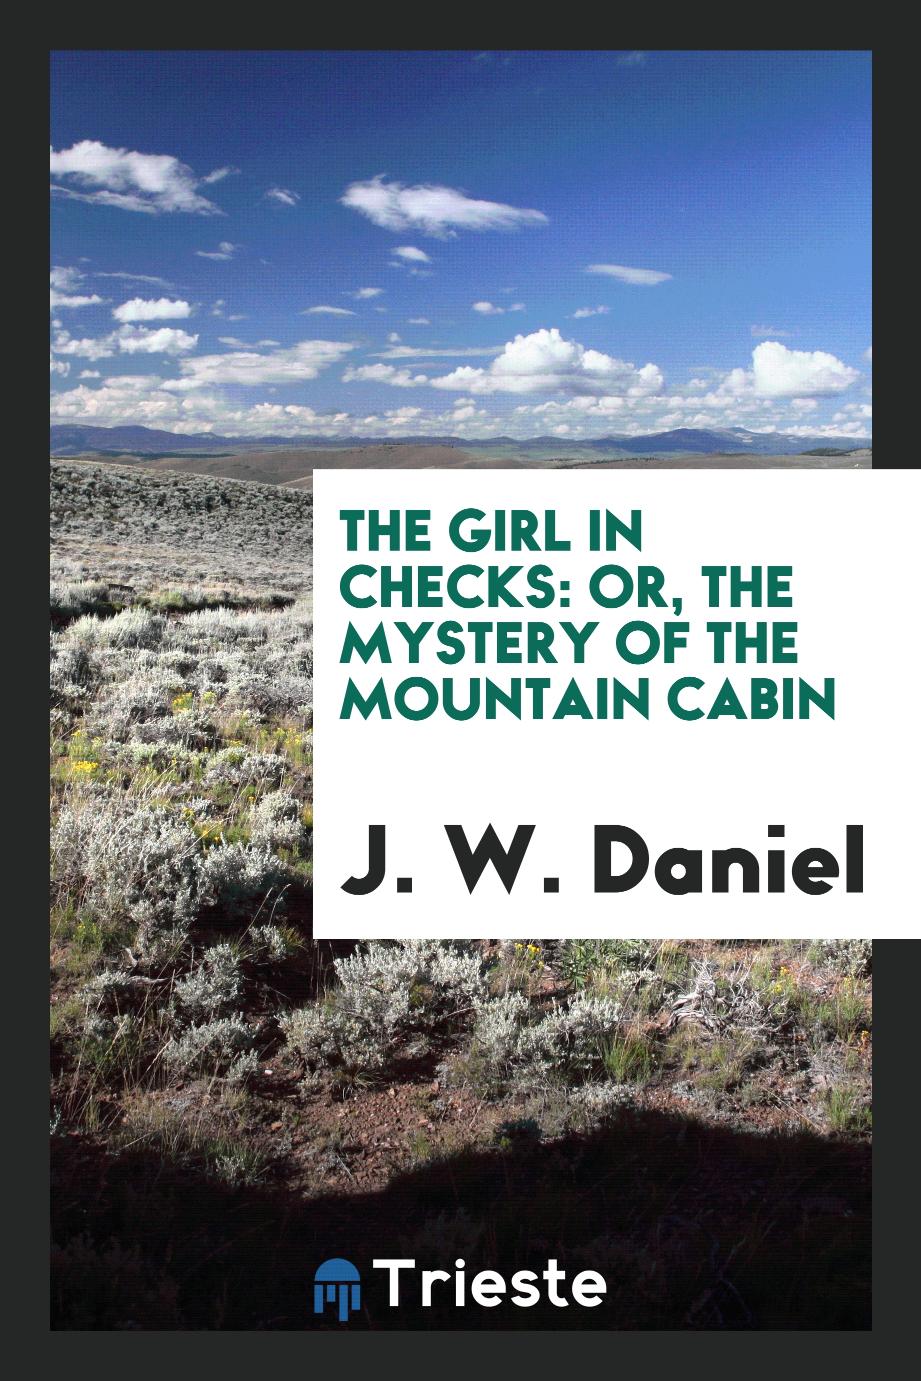 The girl in checks: or, The mystery of the mountain cabin